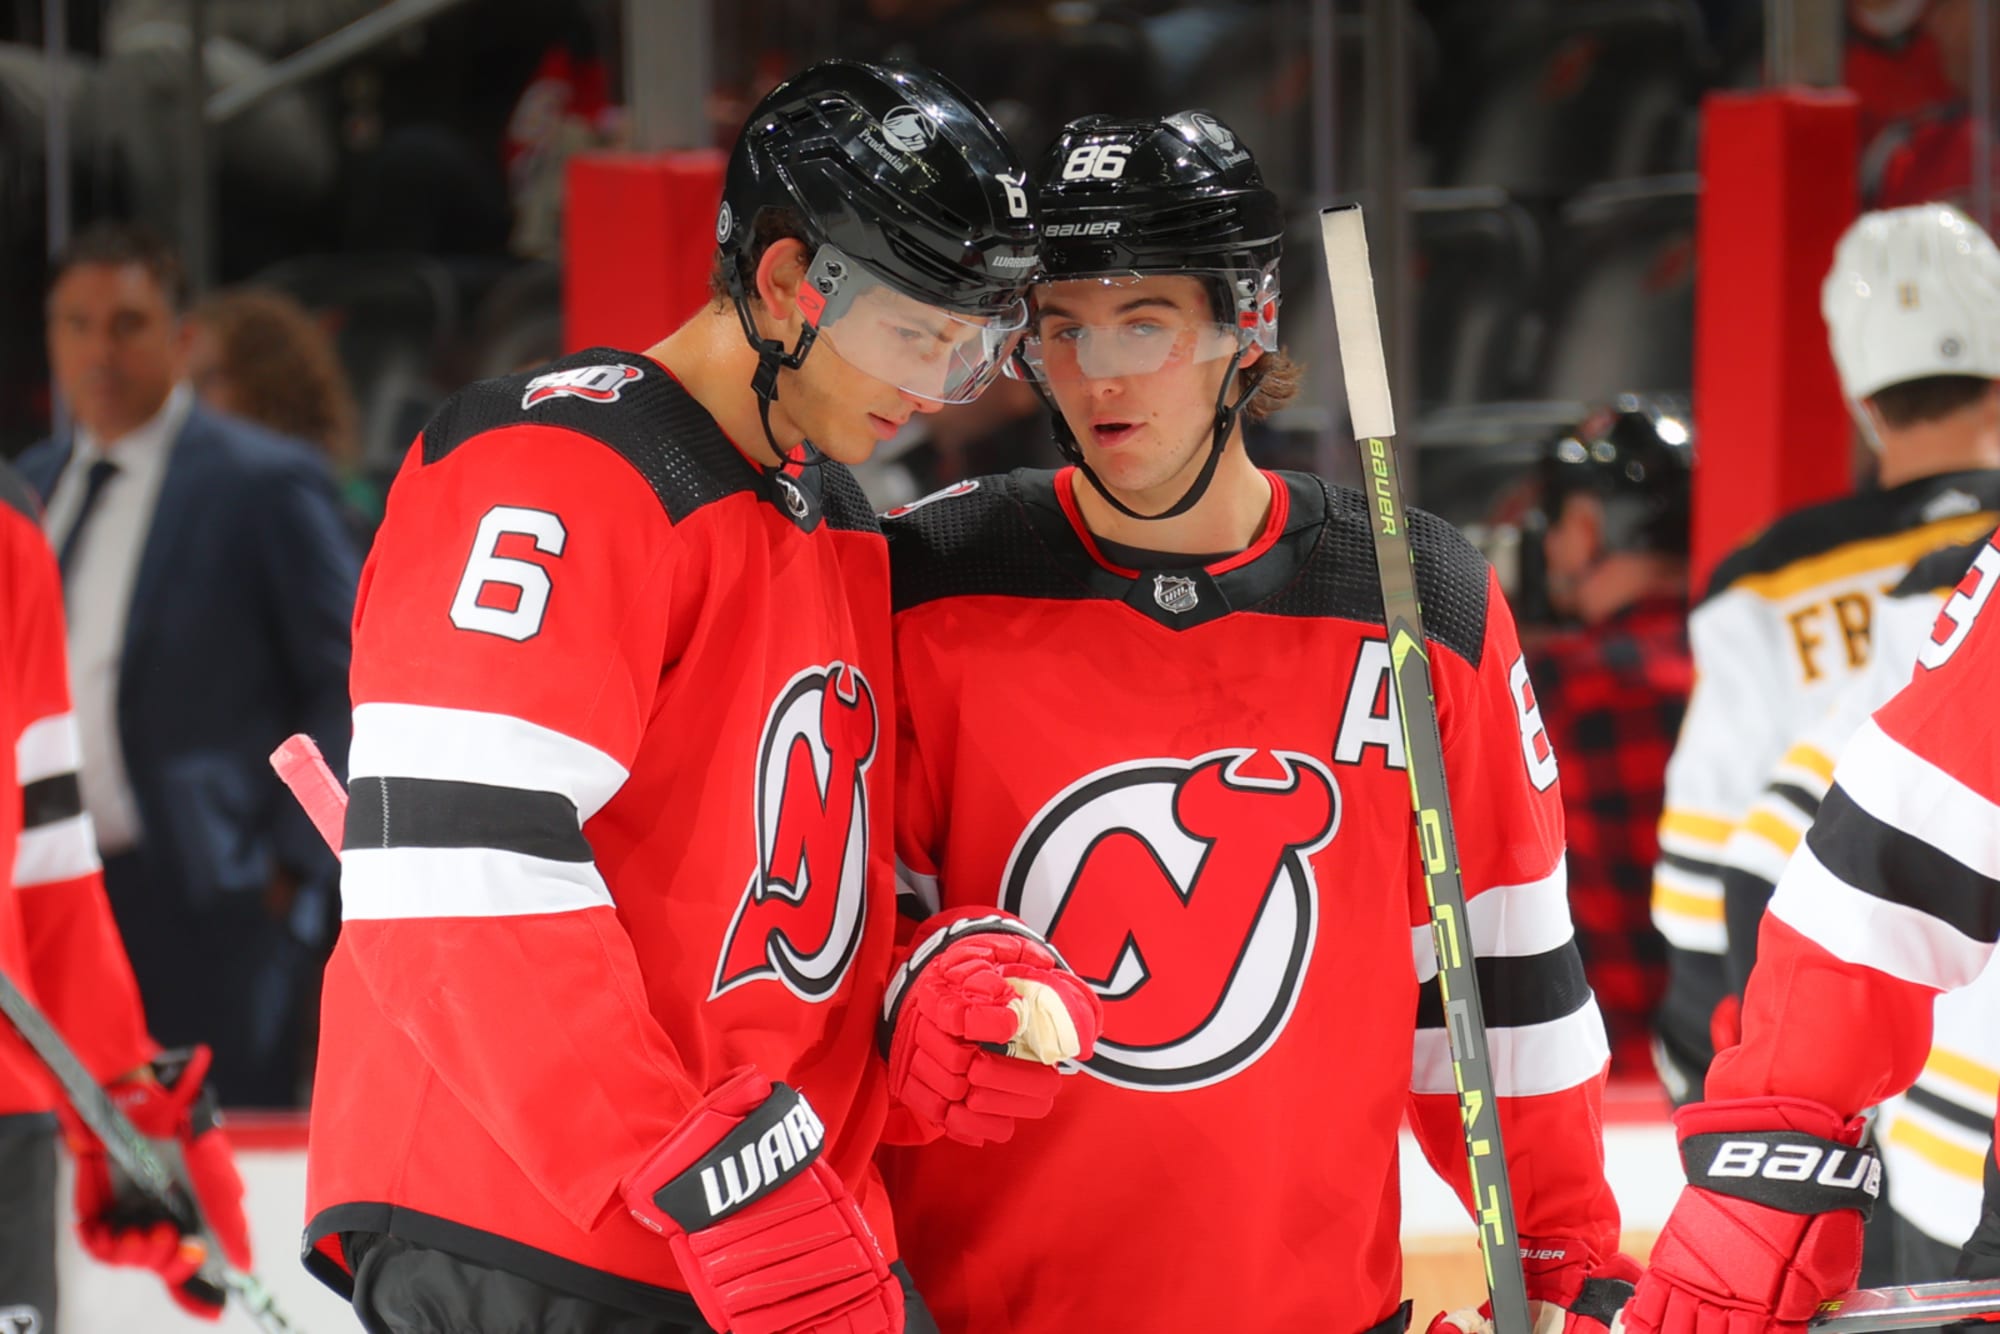 The AAtJ October 2021 Month in Review of the New Jersey Devils